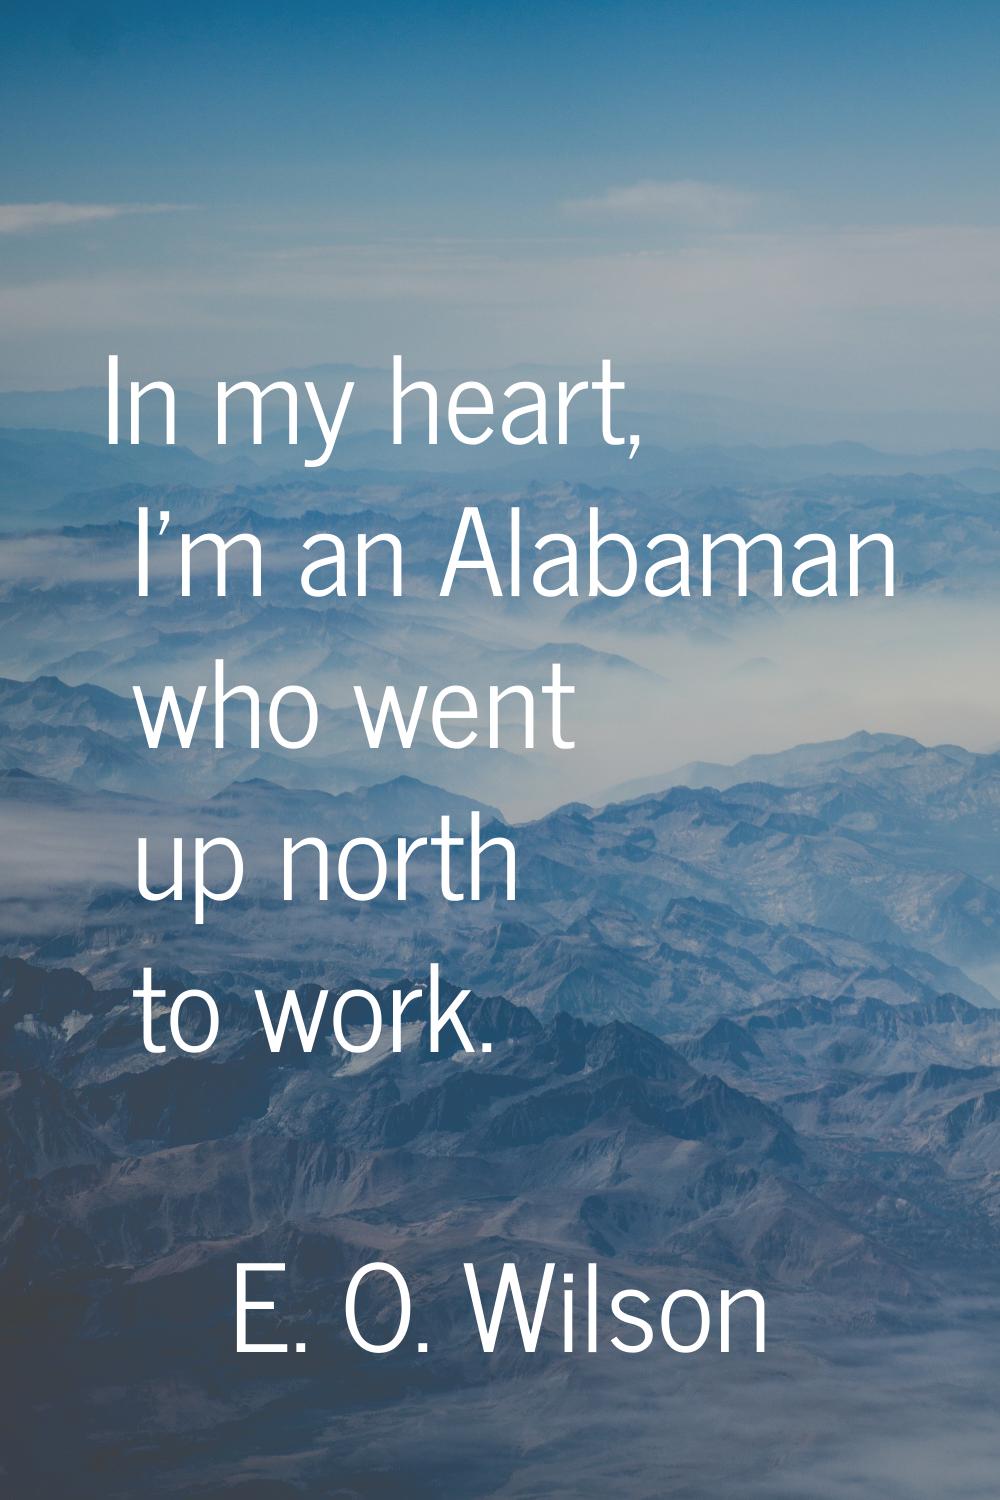 In my heart, I'm an Alabaman who went up north to work.